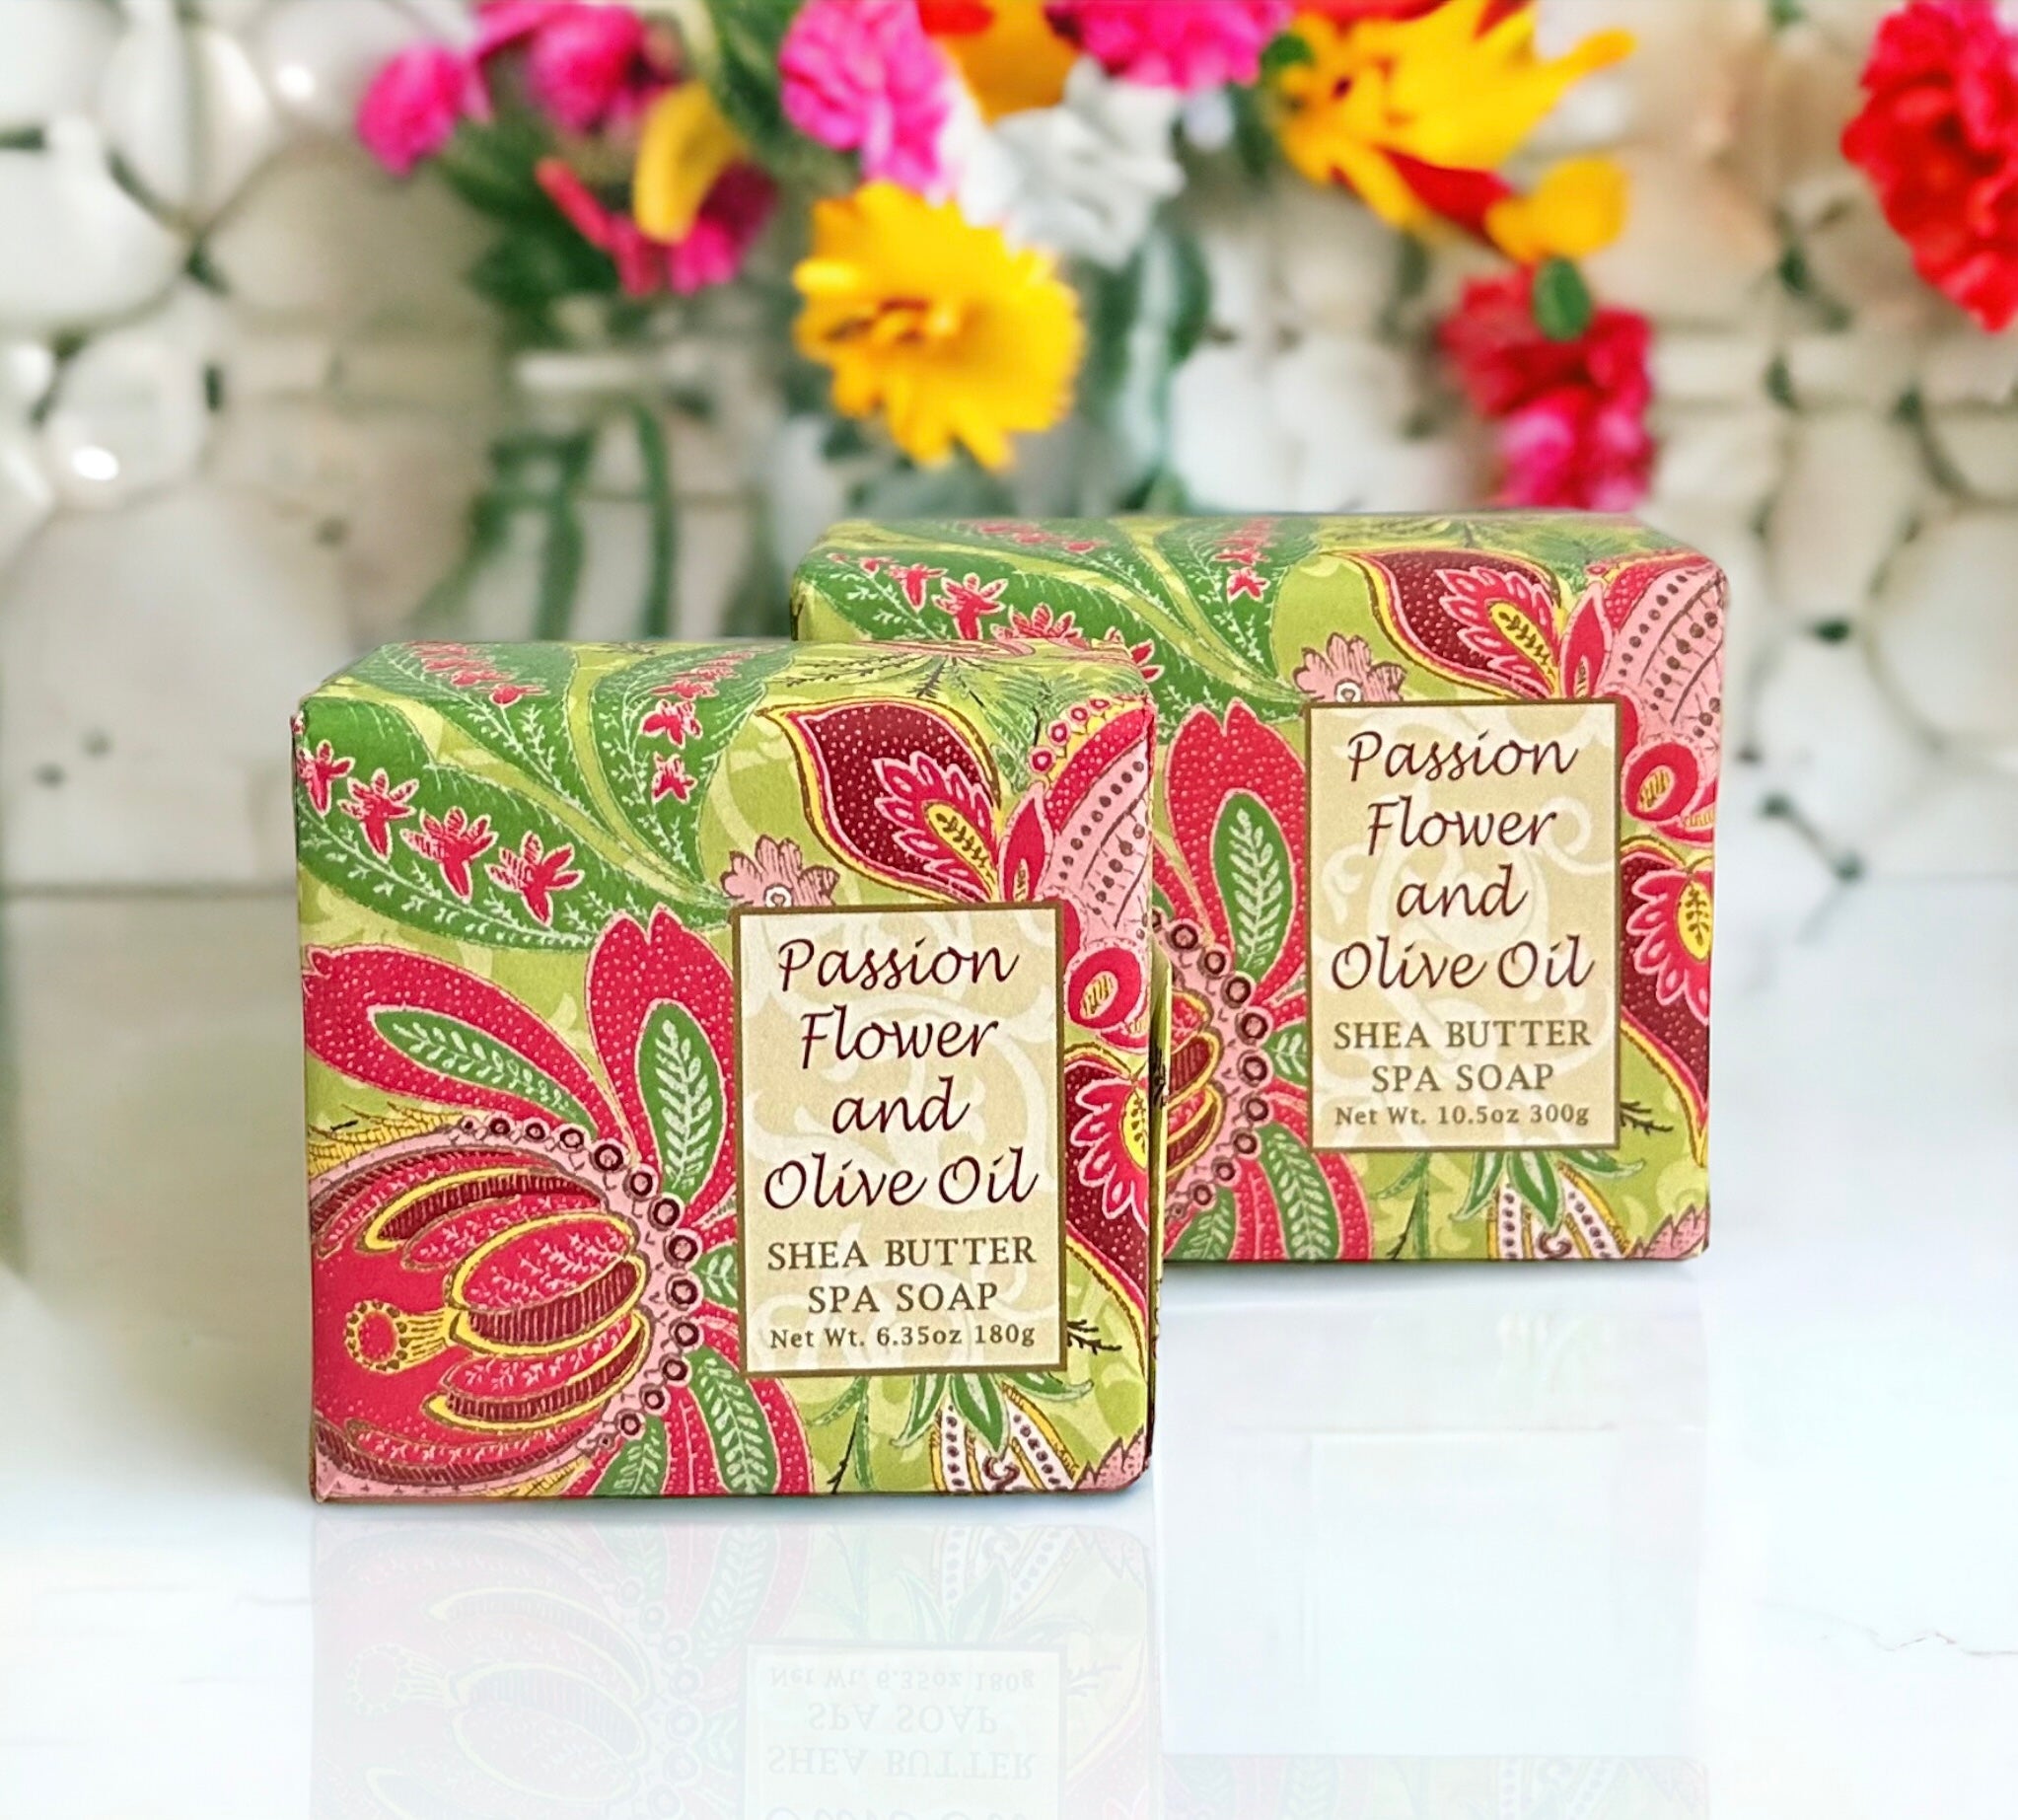 Greenwich Bay Trading Company PASSION Flower & OLIVE OIL soap 6.3 oz